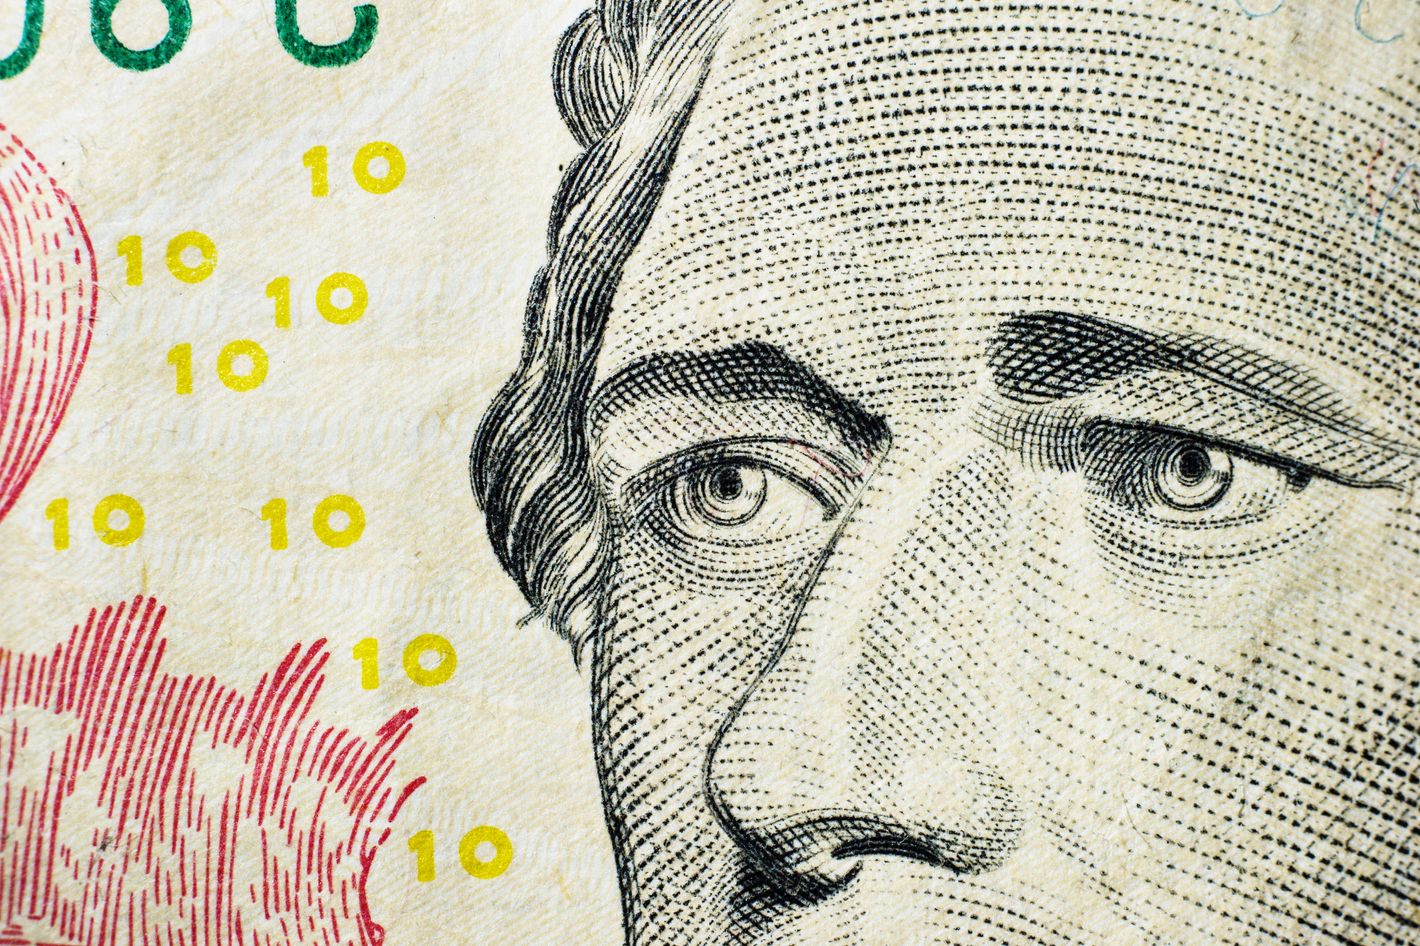 Hamilton stays on $10 bill while Tubman goes on $20